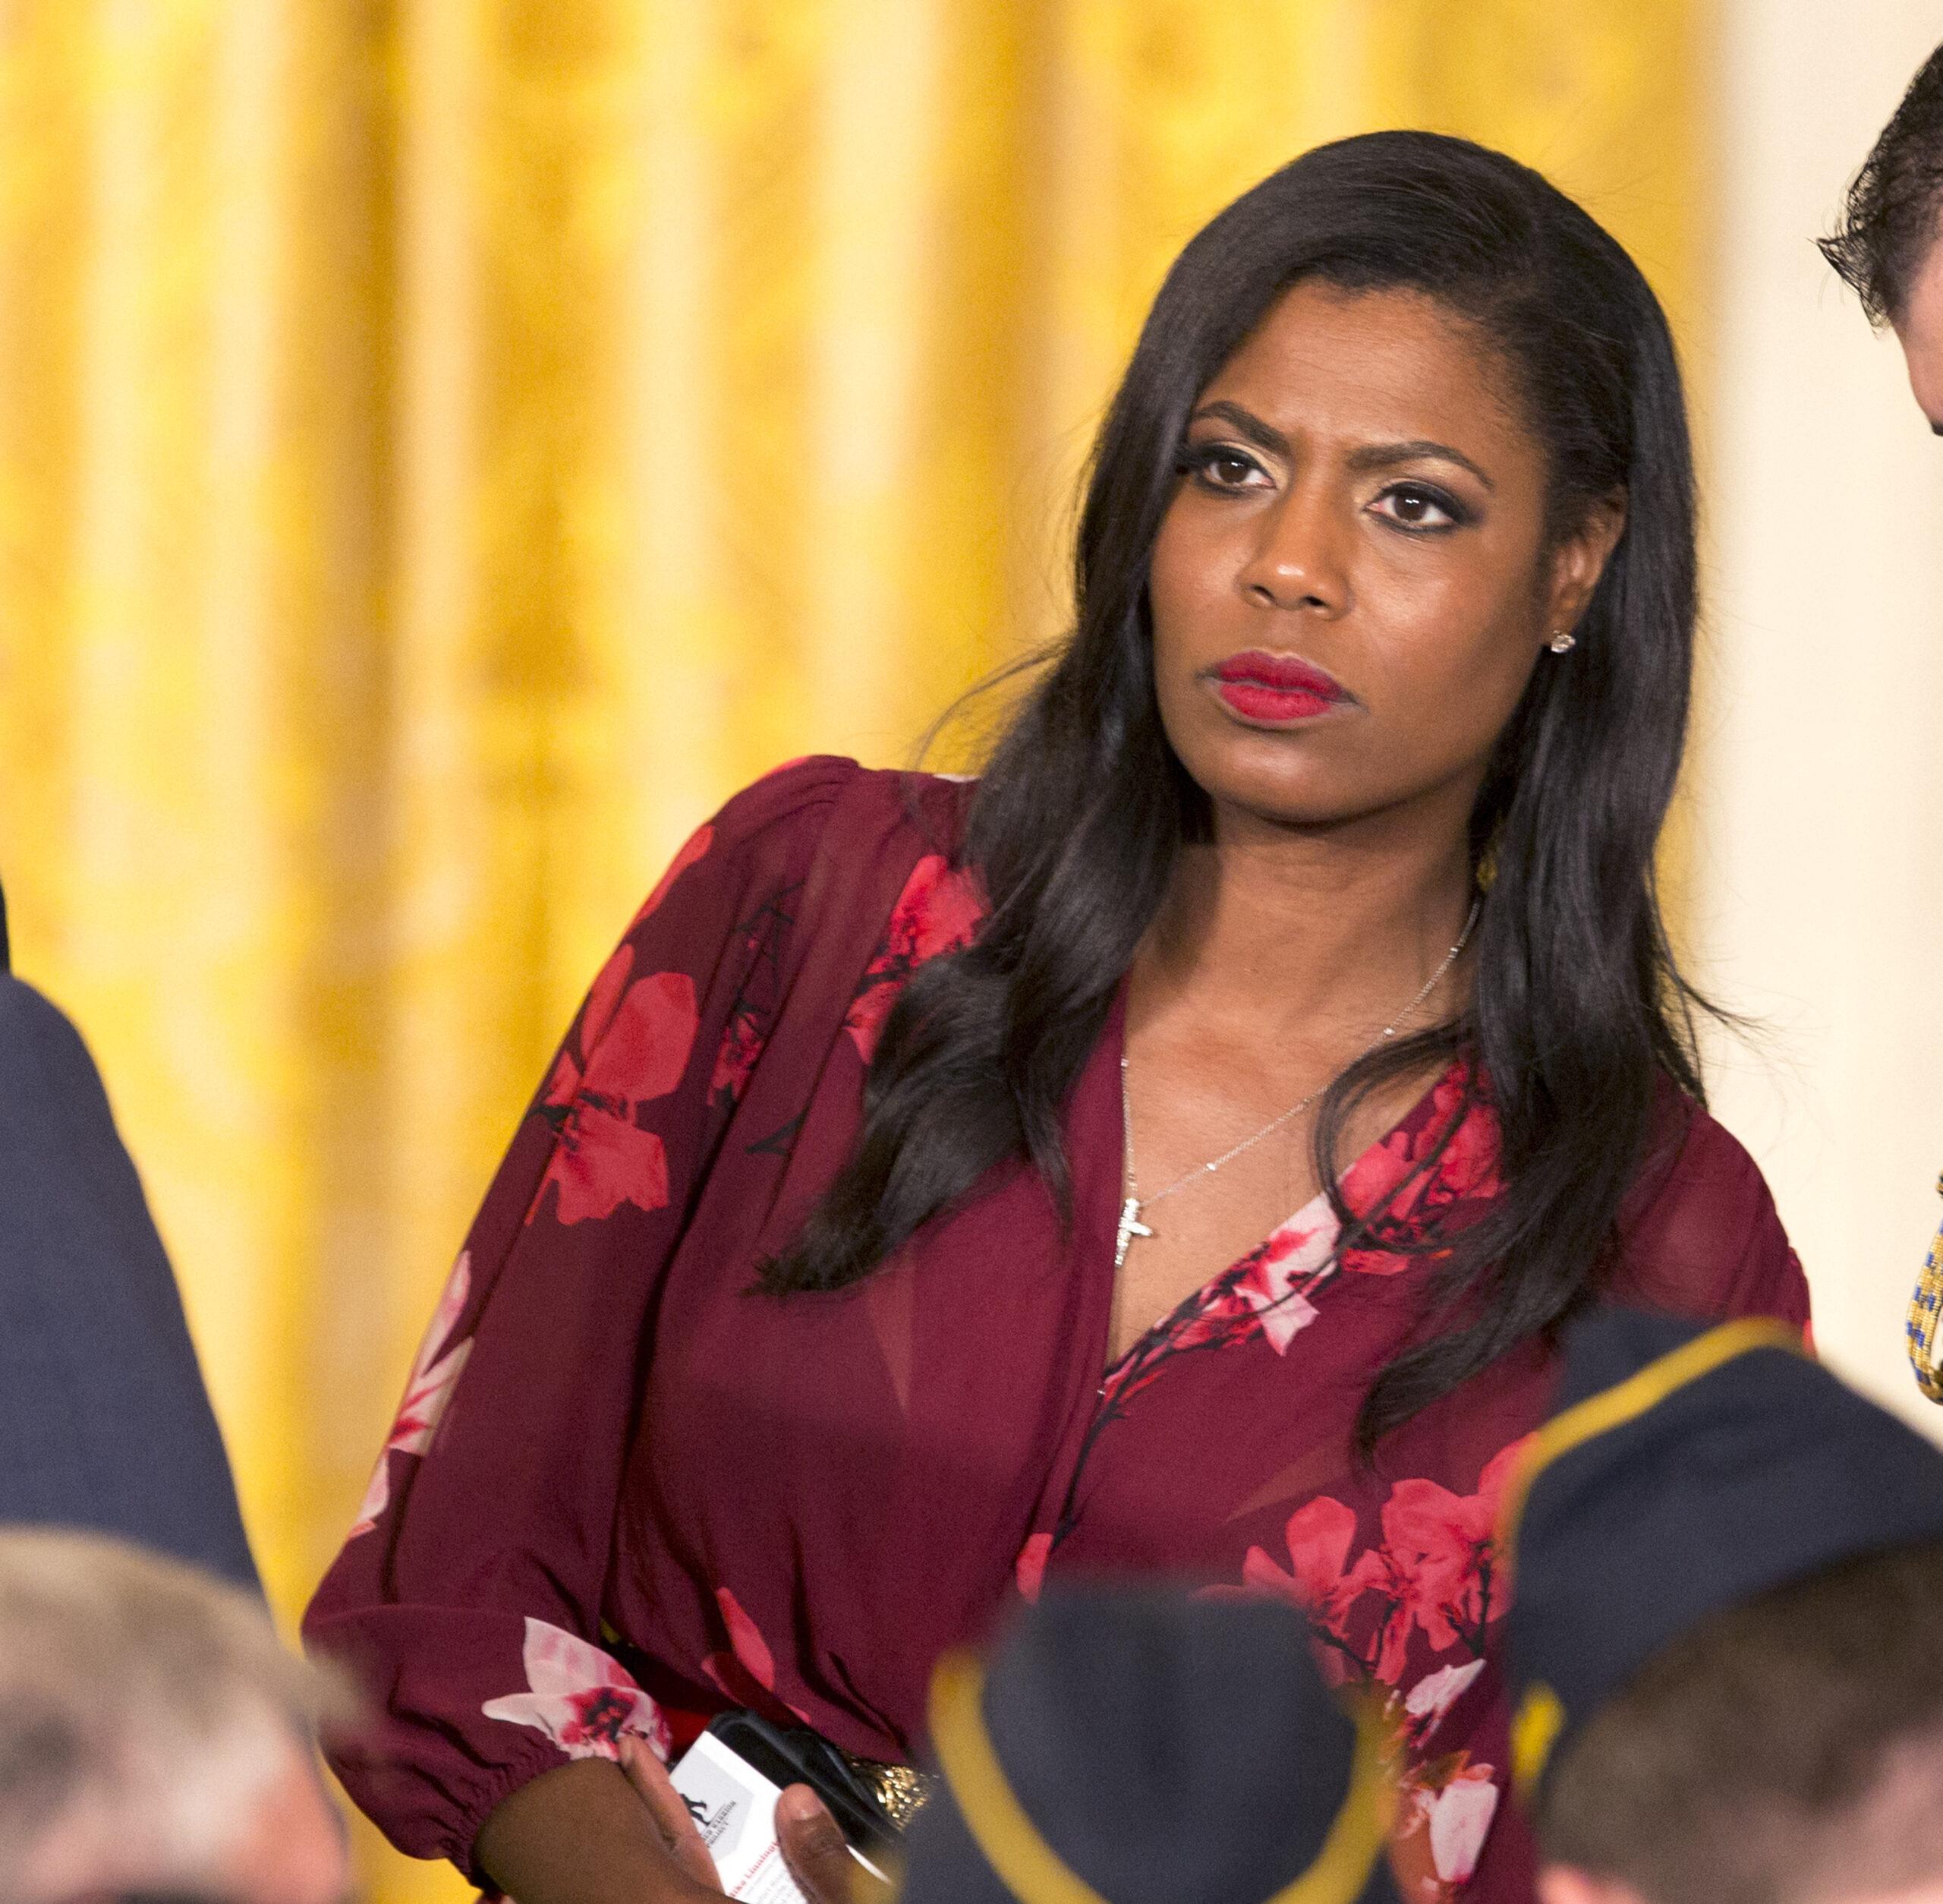 Omarosa in a floral top